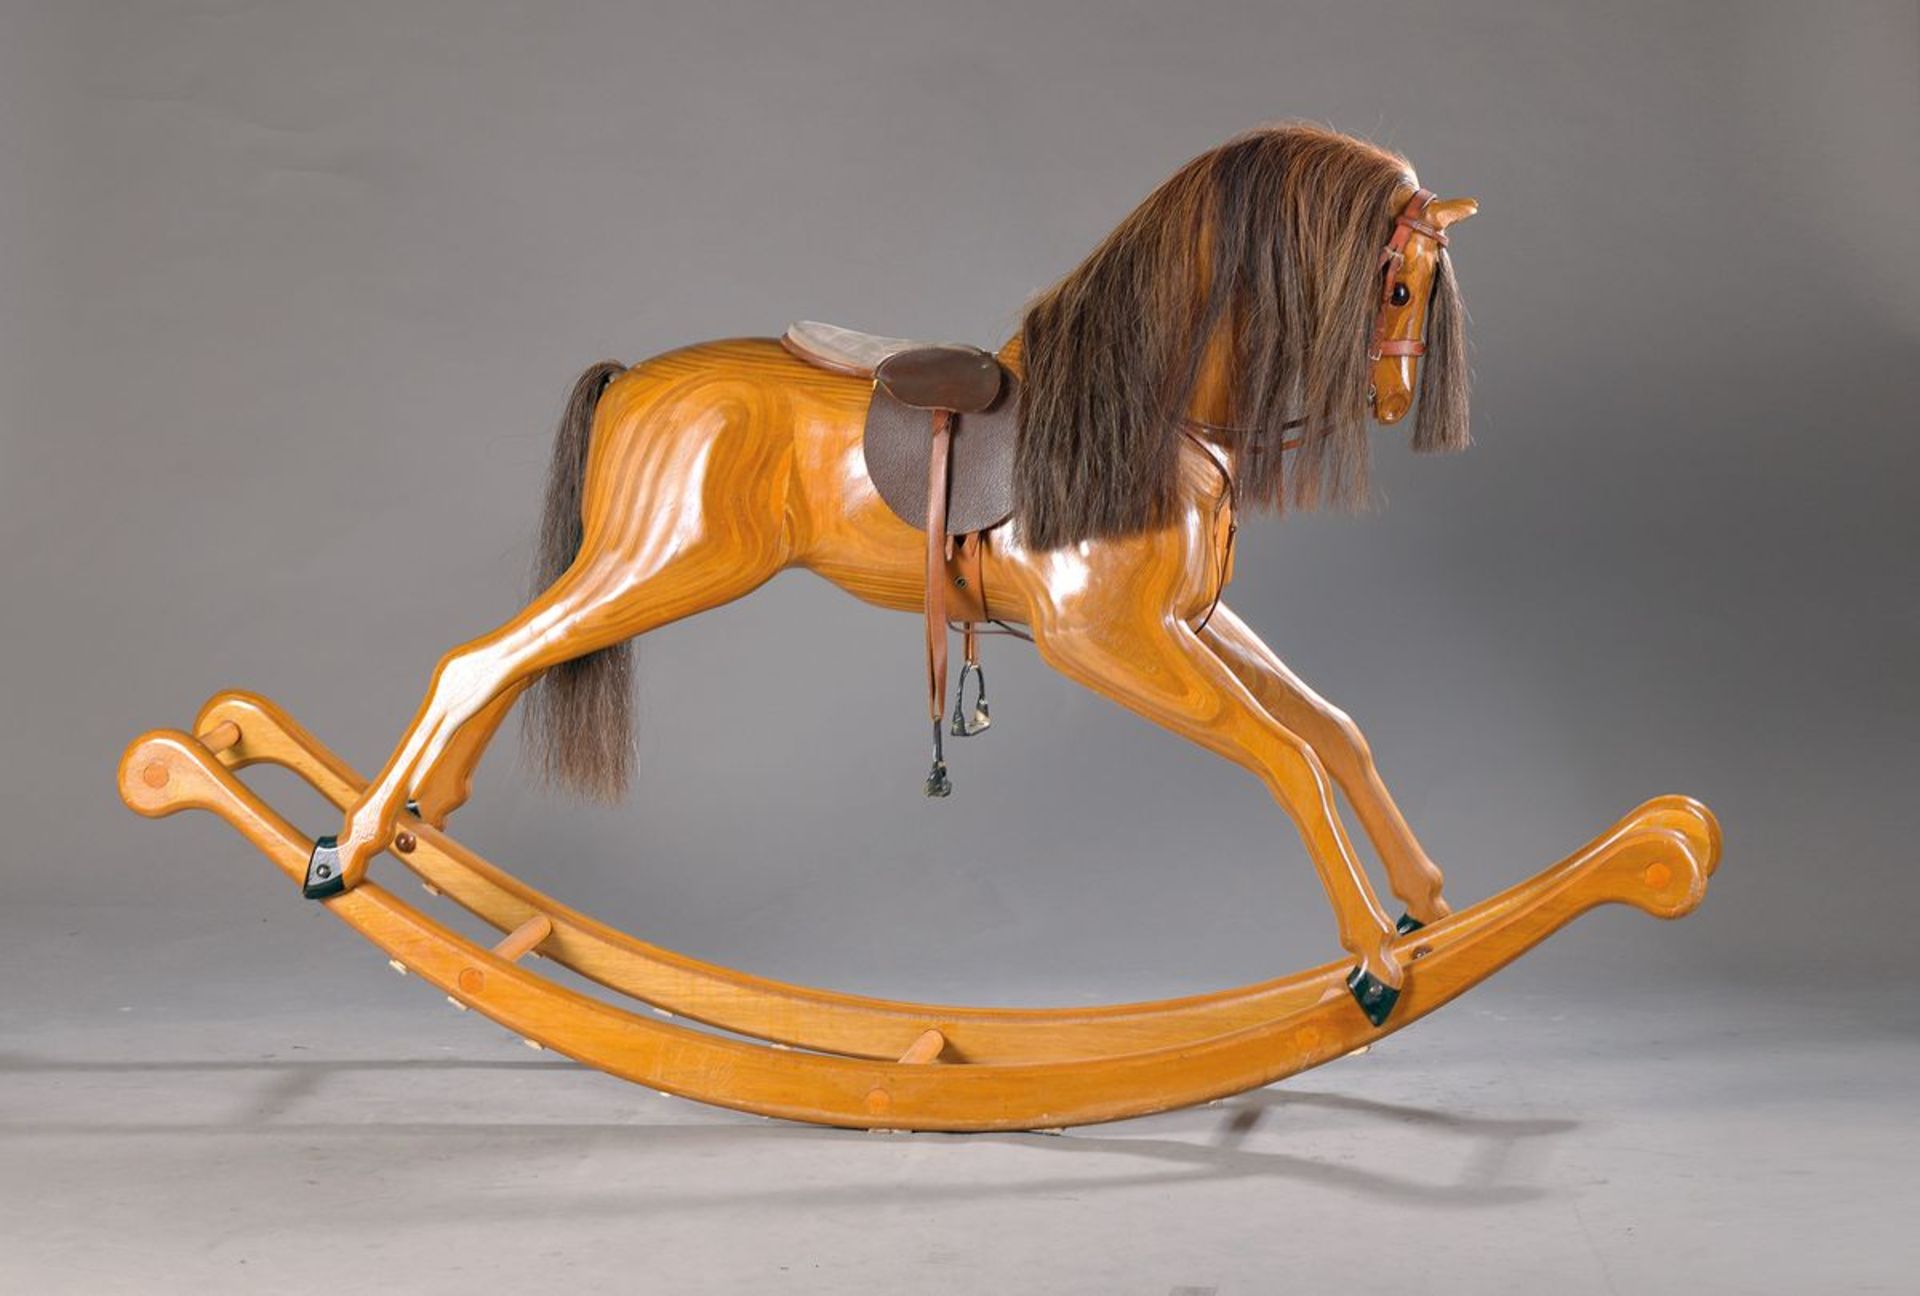 Very large Relko Rocking Horse of 1981, Model 377 S Roland, elaborate handcraft with real mane of